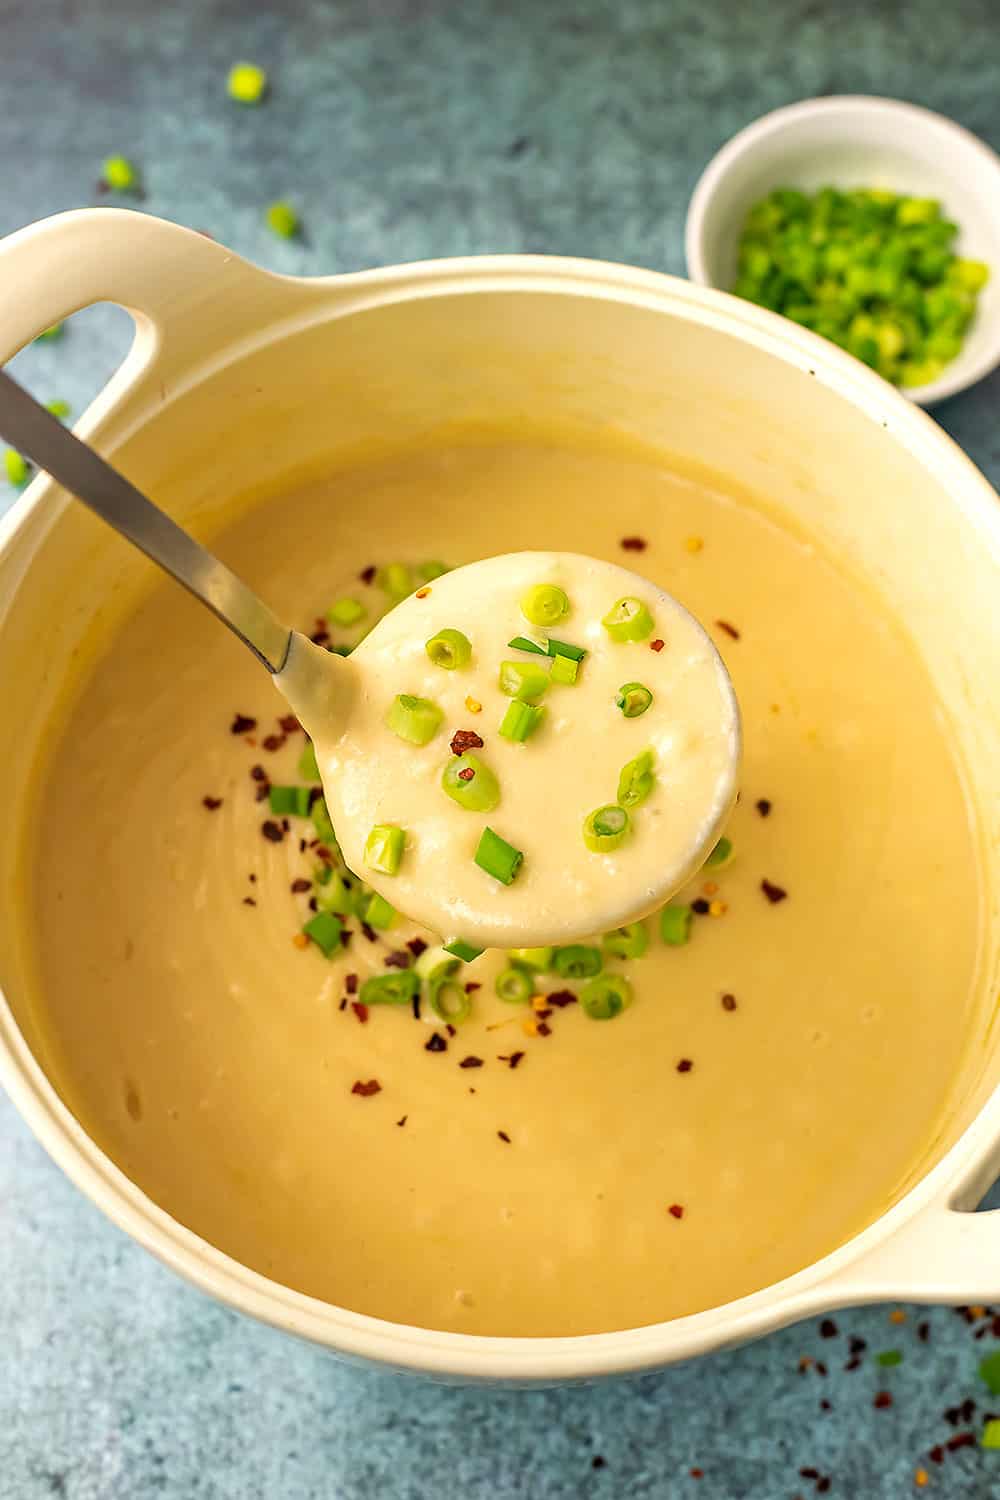 4 Ingredient Potato Soup - Easy 30 Minute Meal | Bites of Wellness